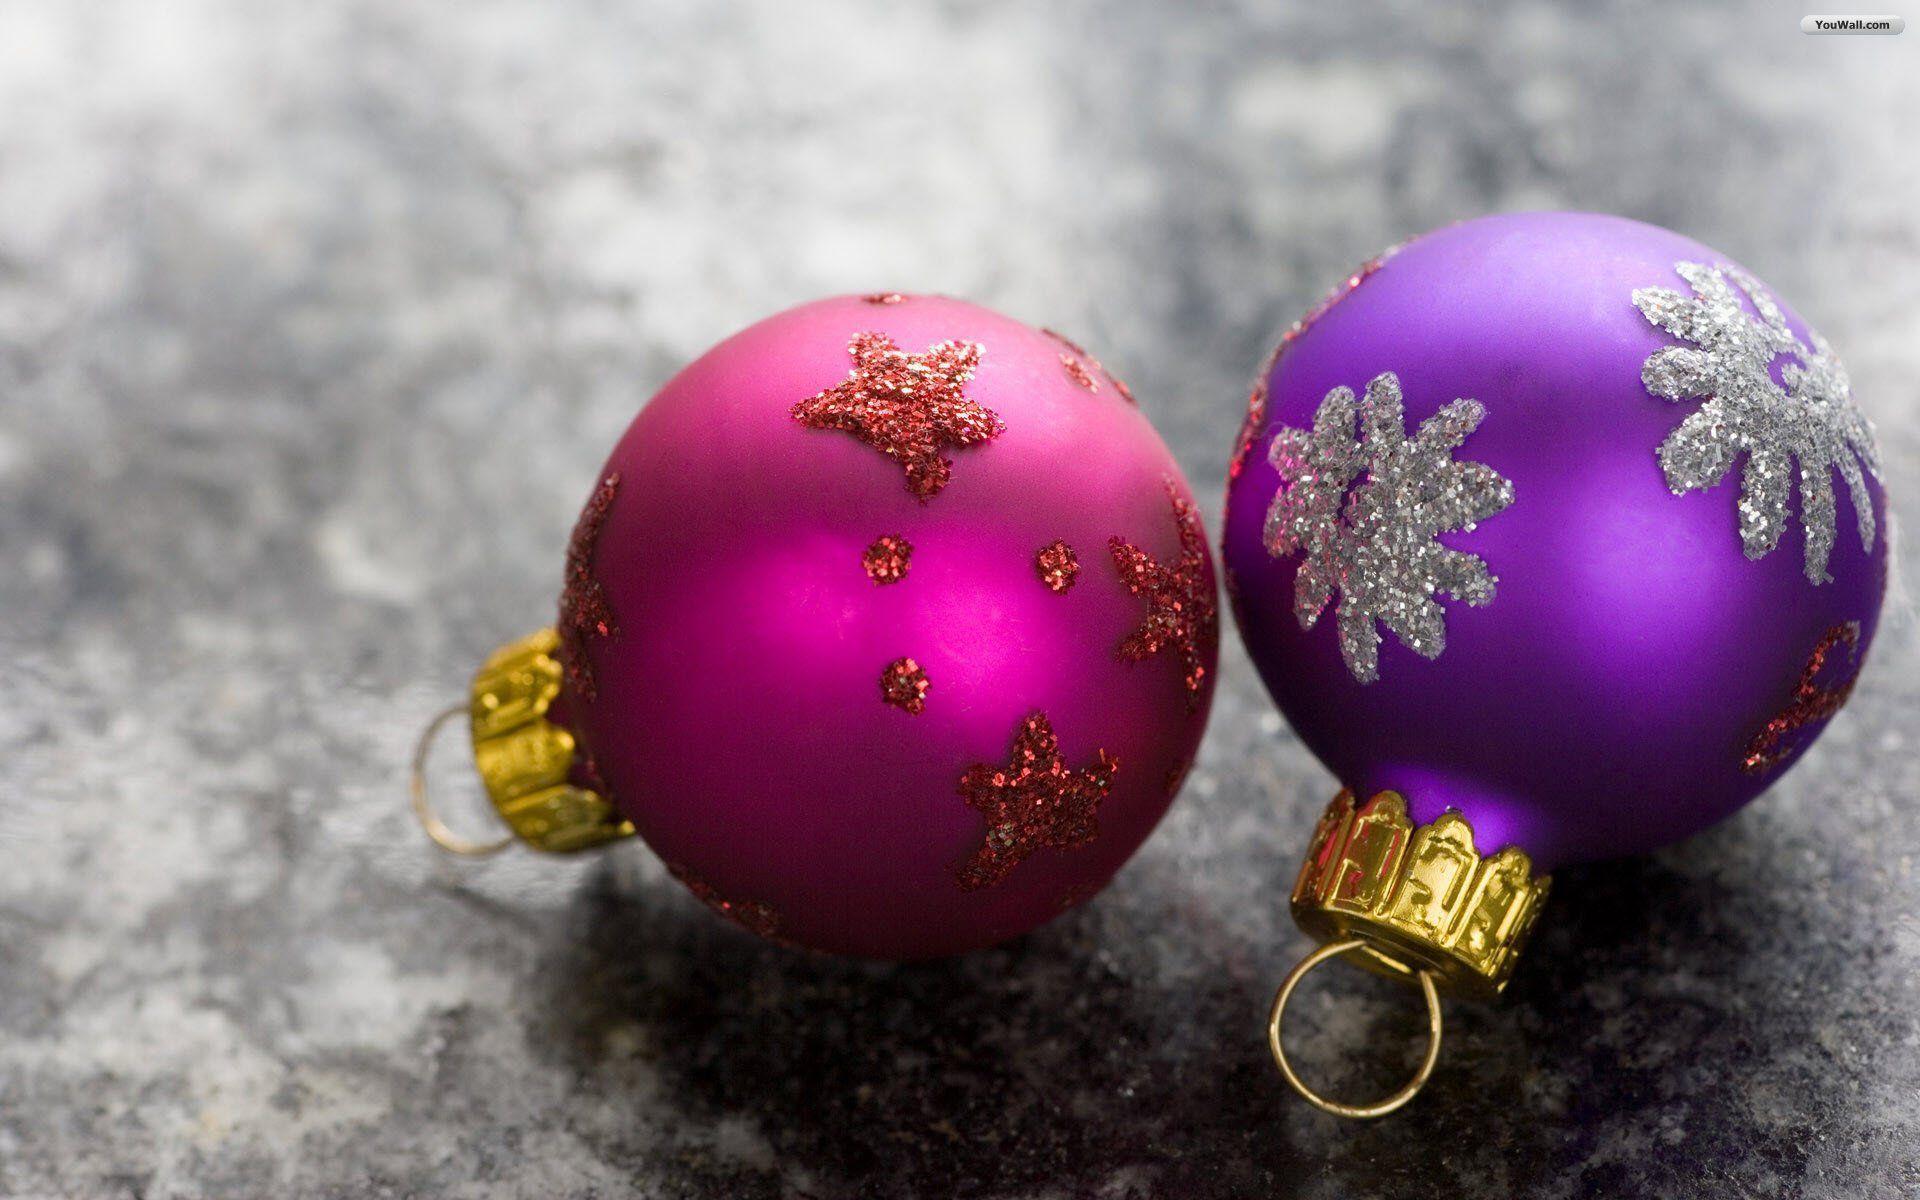 Wallpaper For > Colorful Christmas Ornaments Wallpaper